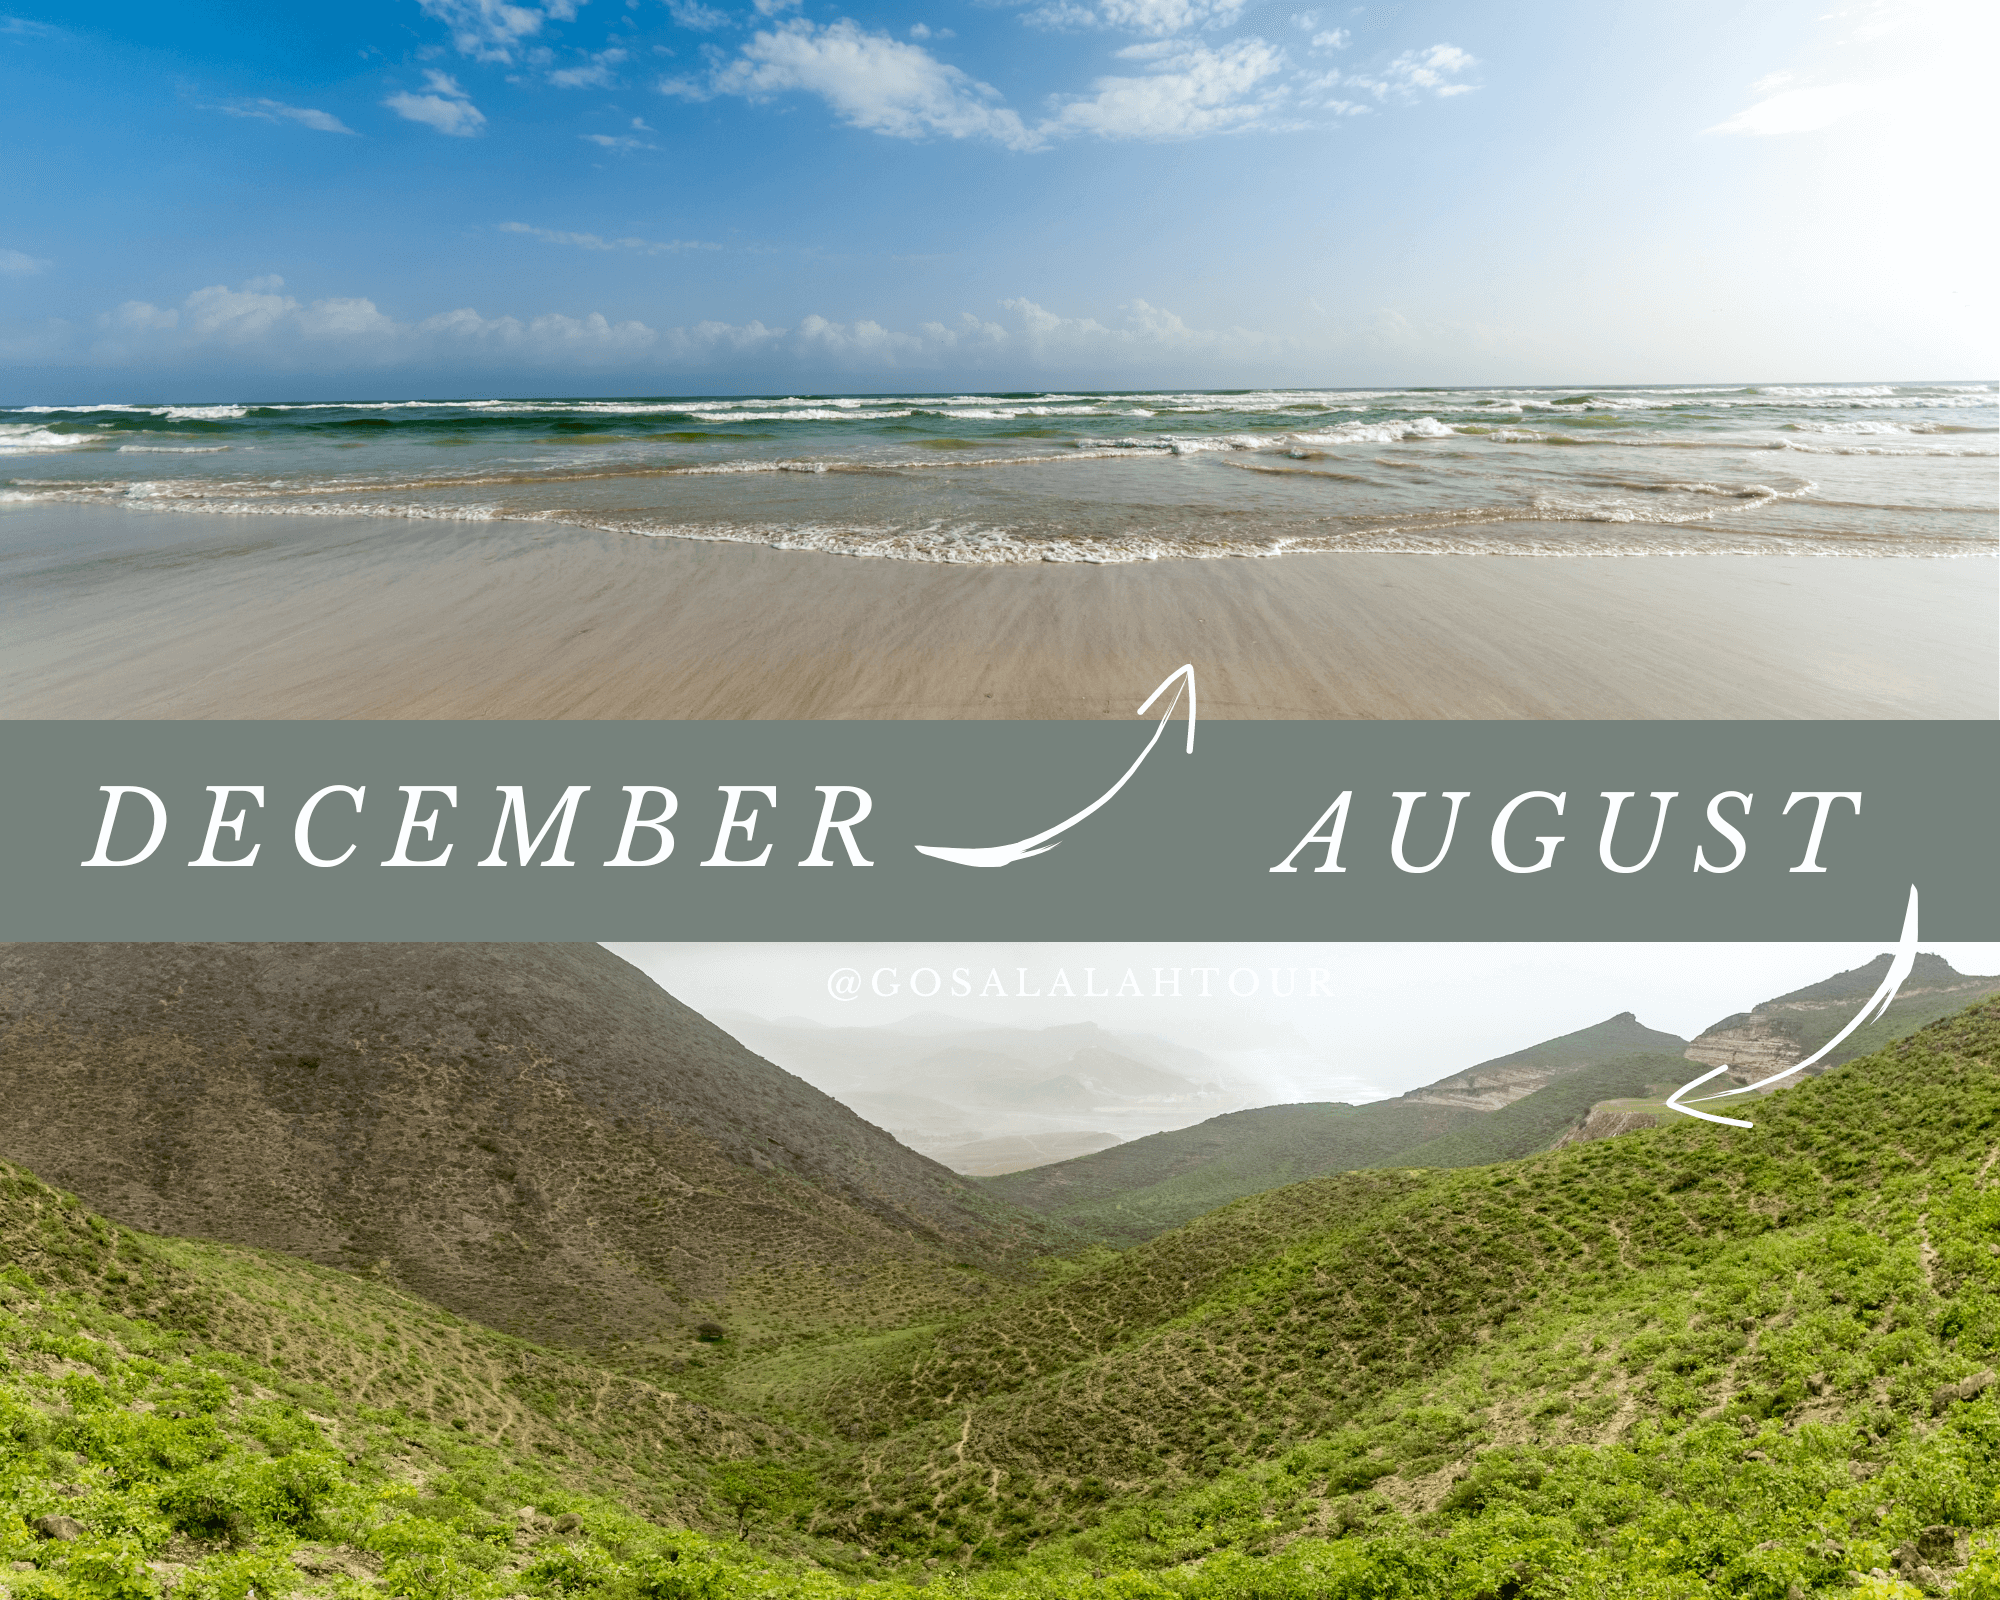 Weather Salalah in December and August Compared